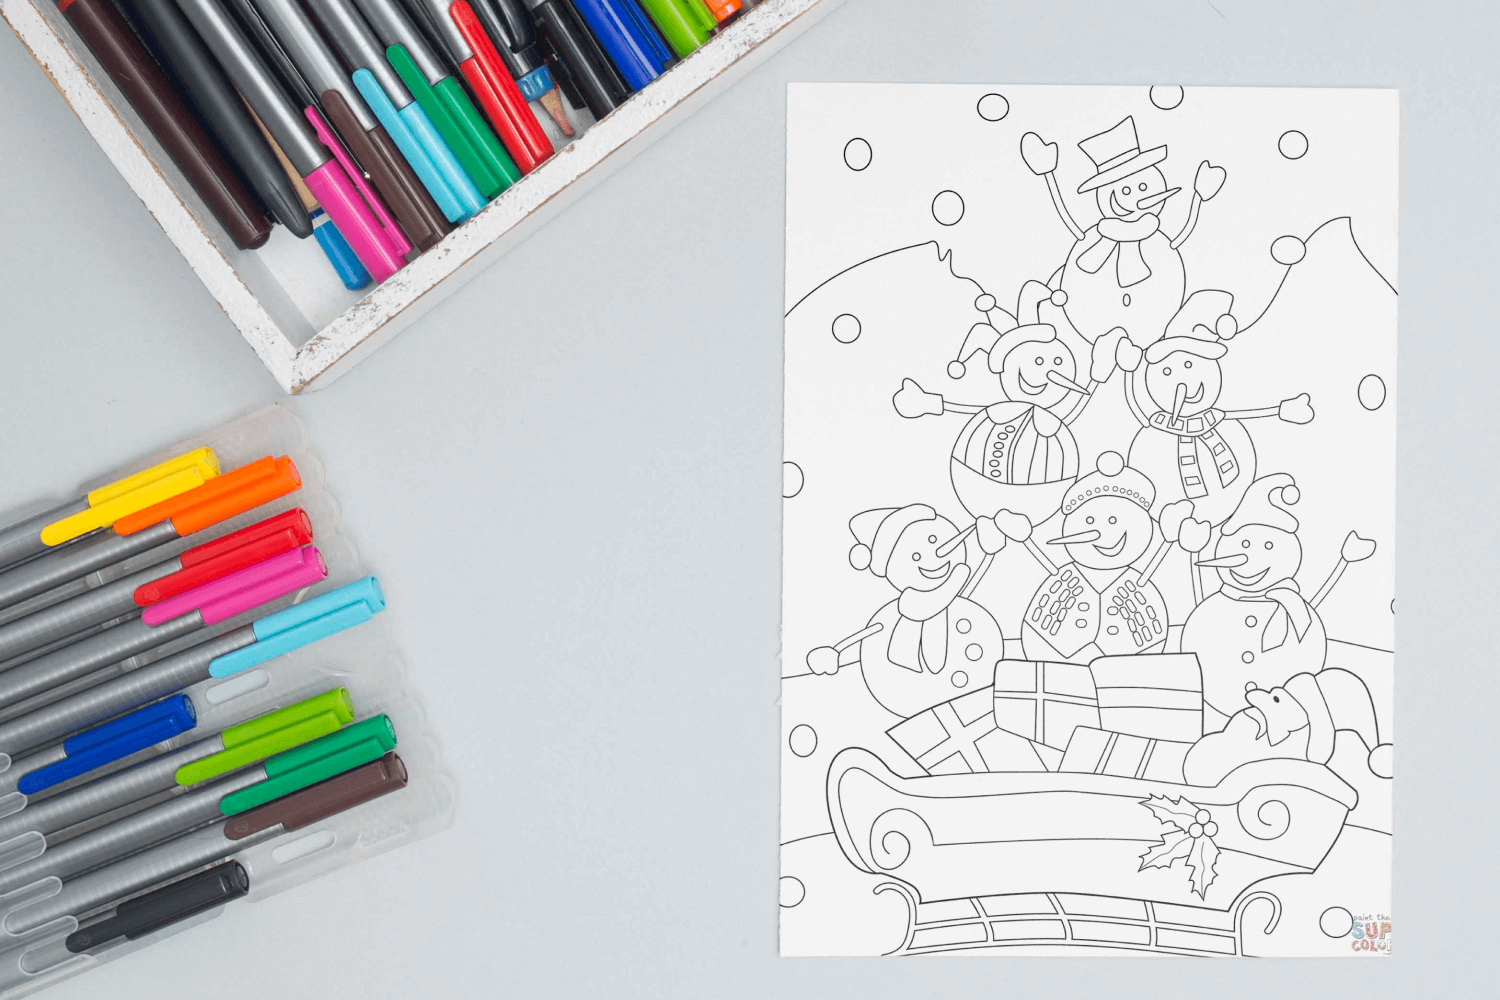 Snowmen with Santa on a Sled coloring page facebook image.